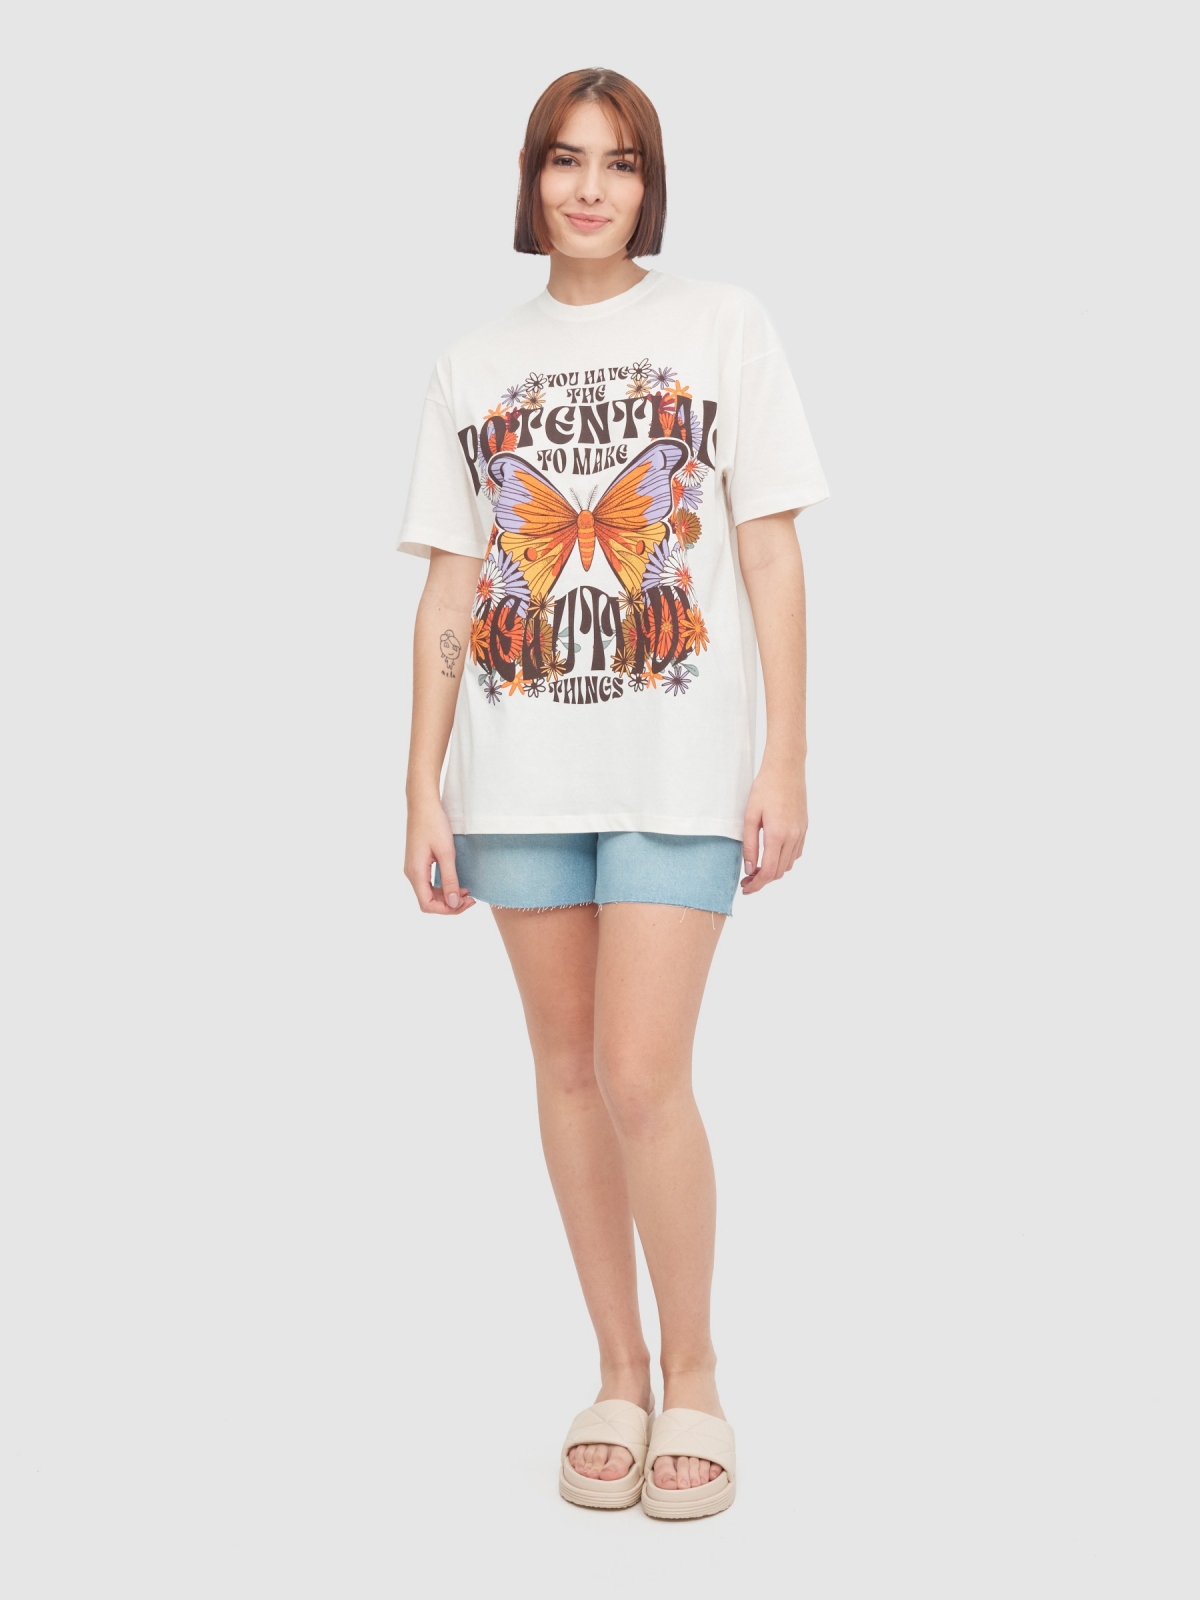 T-shirt oversize Mariposa off white vista geral frontal